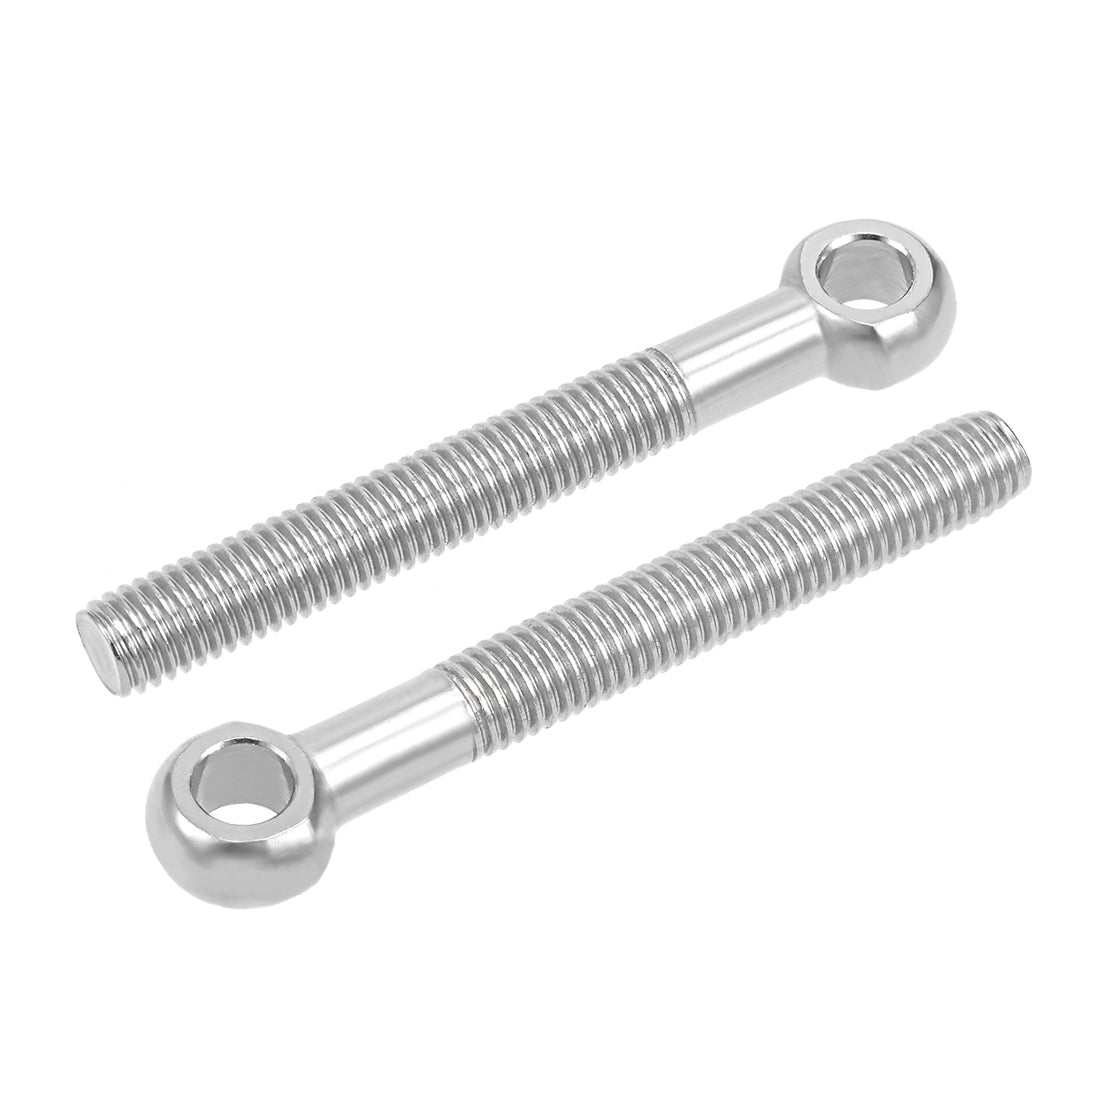 Uxcell Uxcell M5 x 45mm 304 Stainless Steel Machine Shoulder Lift Eye Bolt Rigging 4pcs